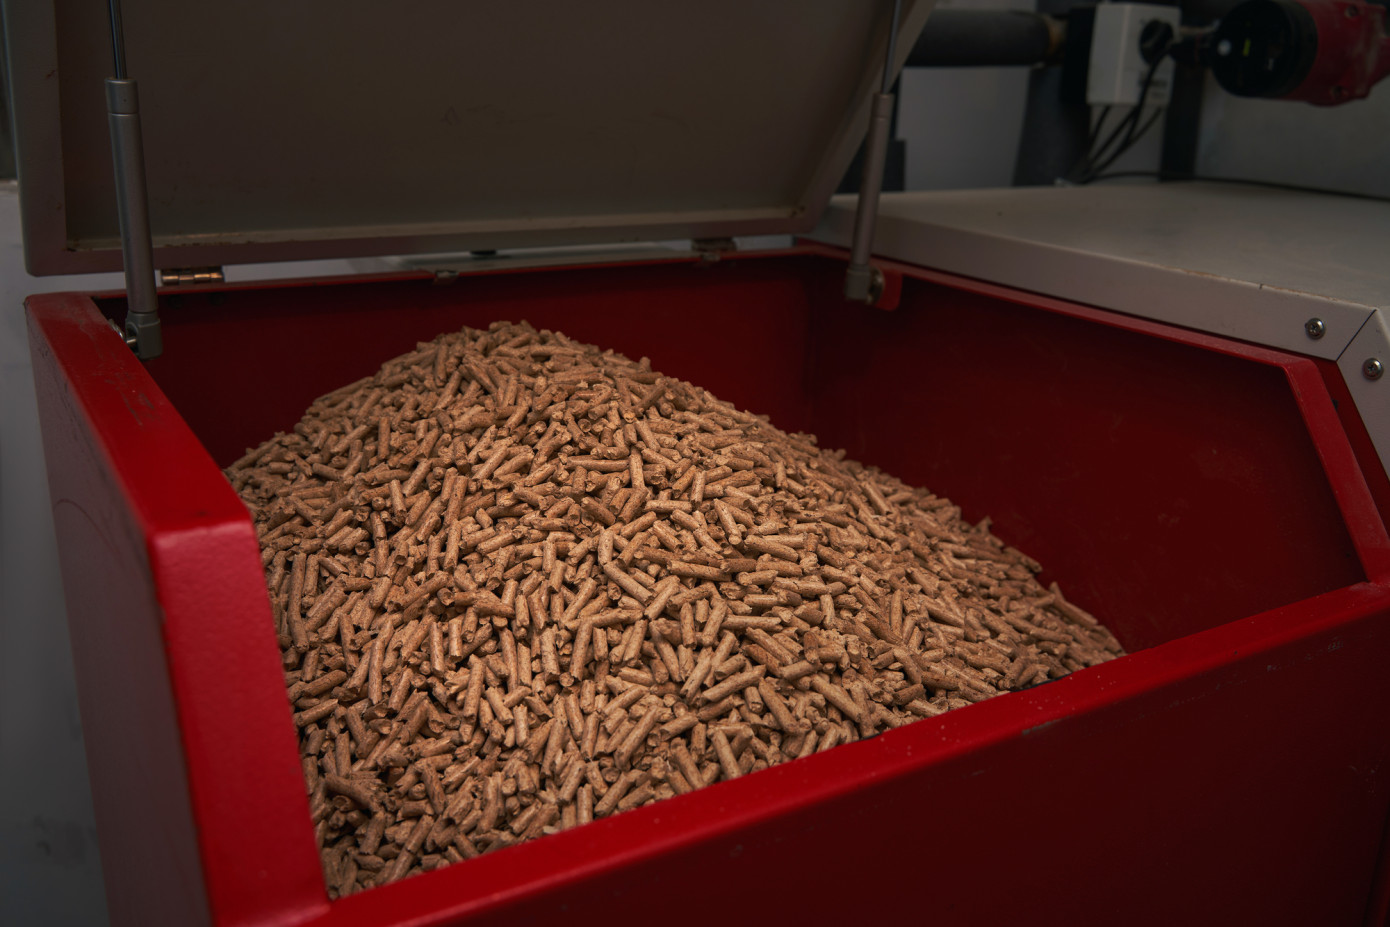 Japan’s imports of wood pellets grow 42% in 2022